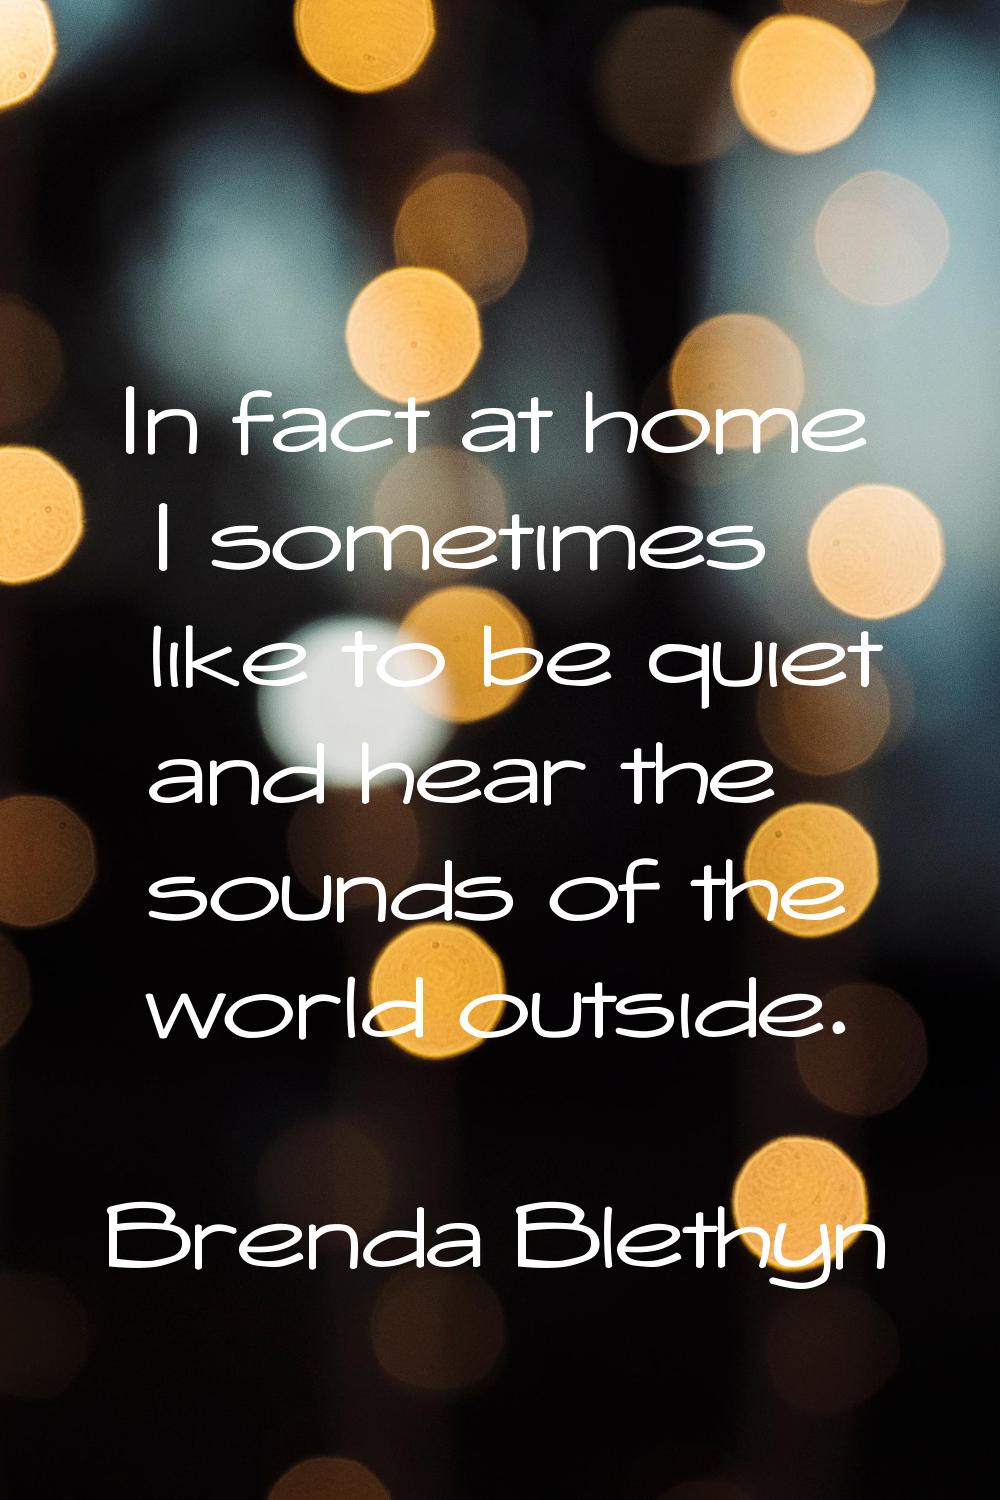 In fact at home I sometimes like to be quiet and hear the sounds of the world outside.